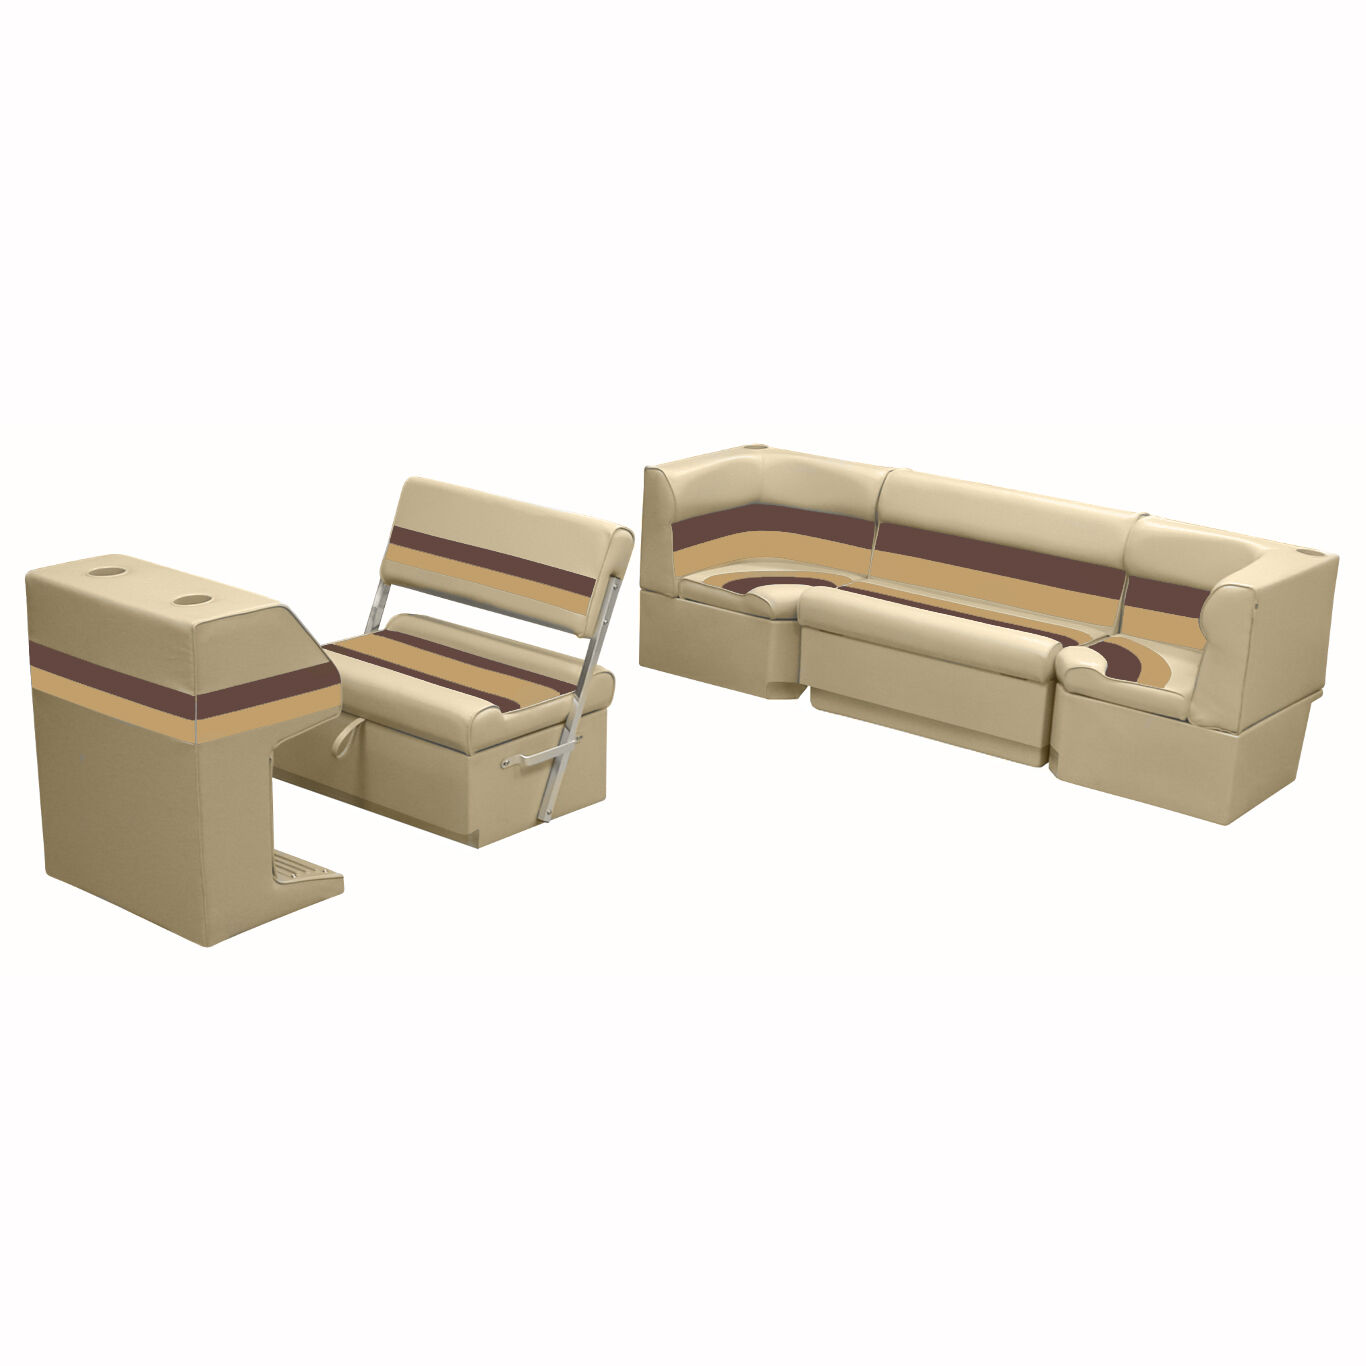 TOONMATE Deluxe Pontoon Furniture w/ Toe Kick Base - Rear Cozy Package, Sand/Chestnut/Gold